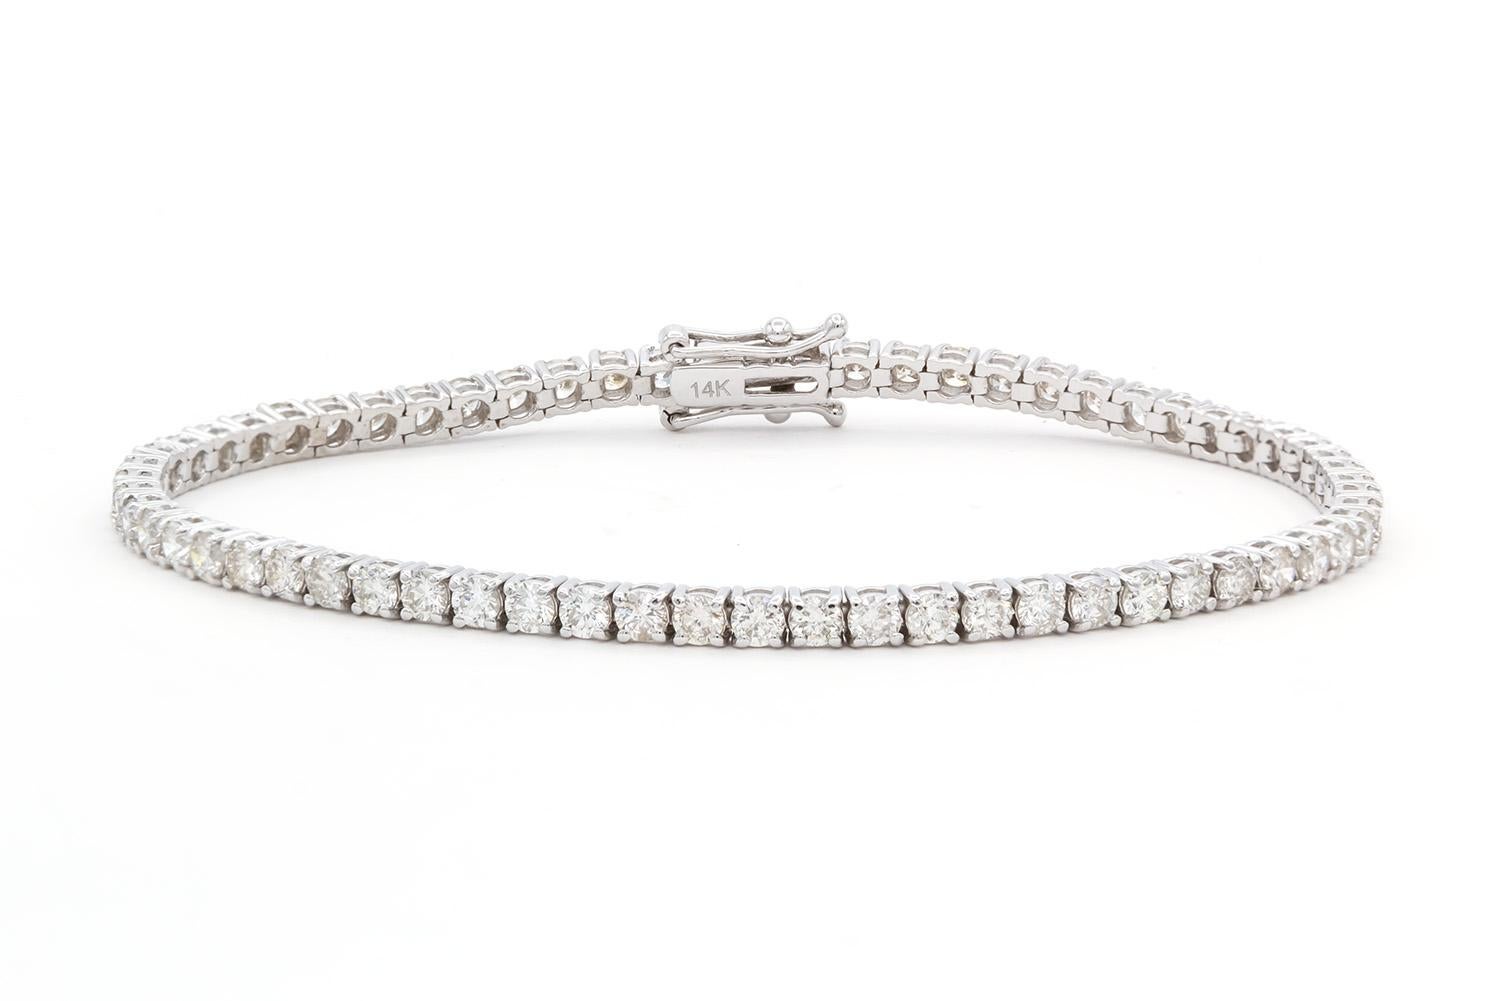 We are pleased to present this beautiful Brand New 14k White Gold & Diamond Tennis Bracelet. It features 4.47ctw G-H/VS2-SI1 Round Brilliant Cut Diamonds set in this 14k white gold tennis bracelet. The bracelet measures 7″ long and features a push